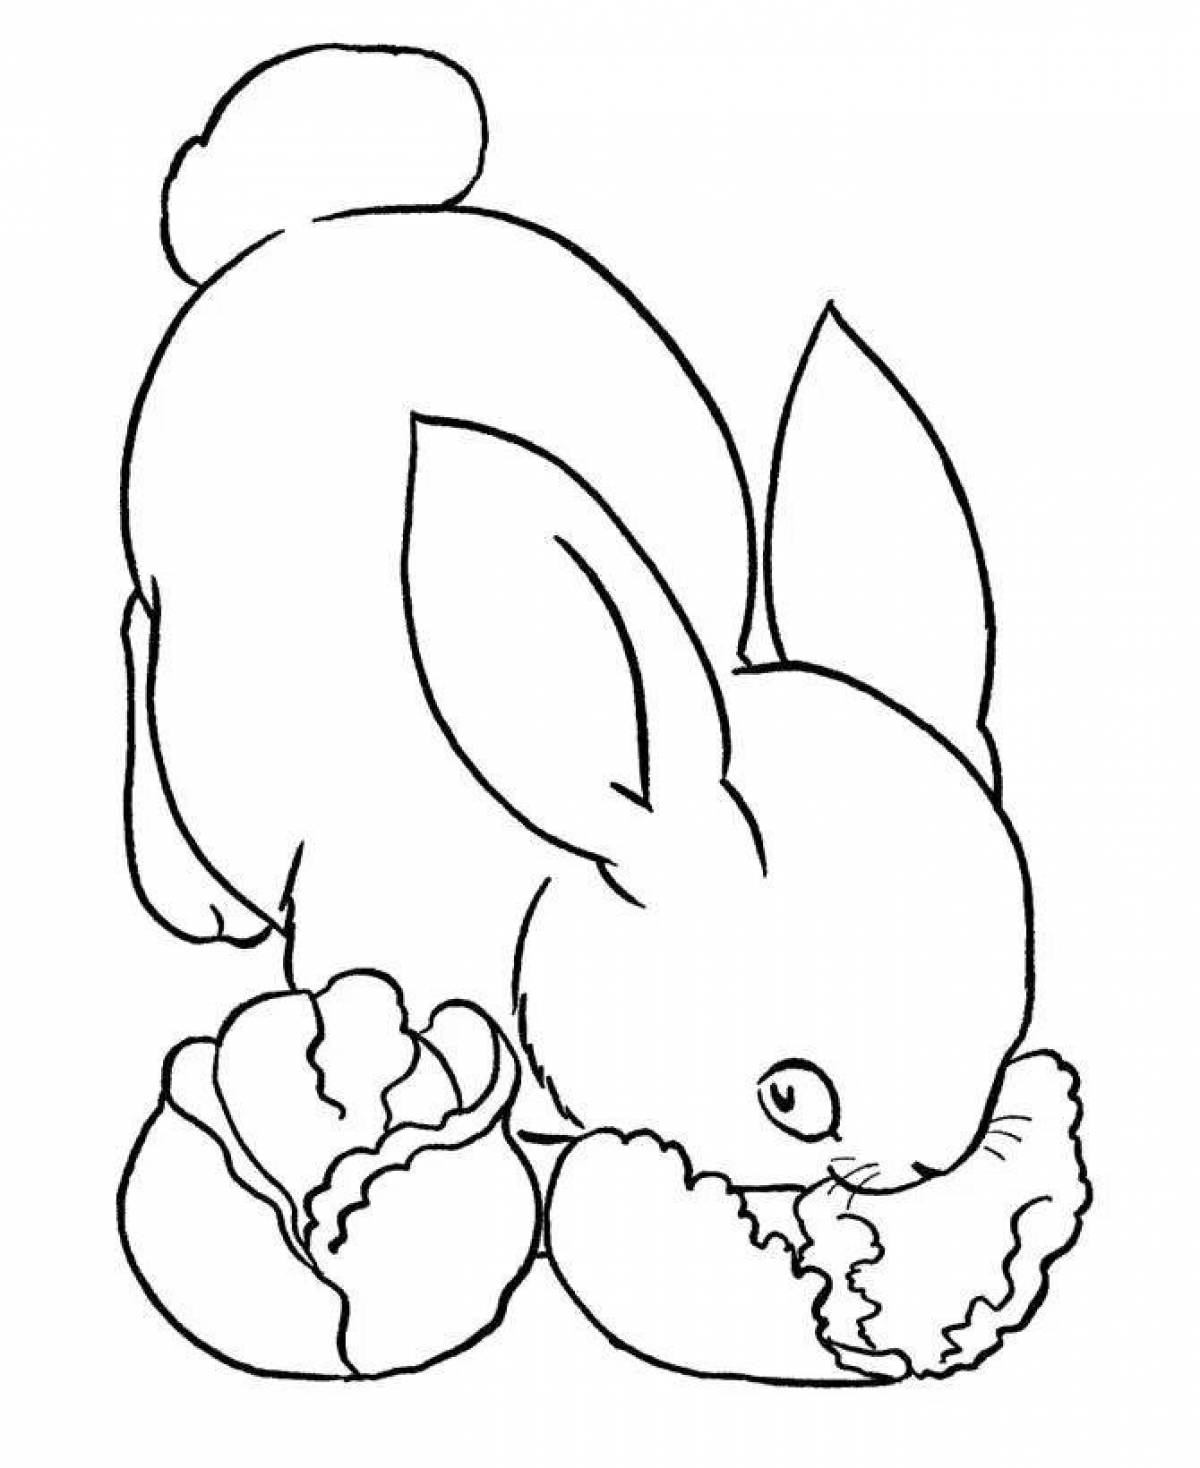 Snuggie rabbit coloring page